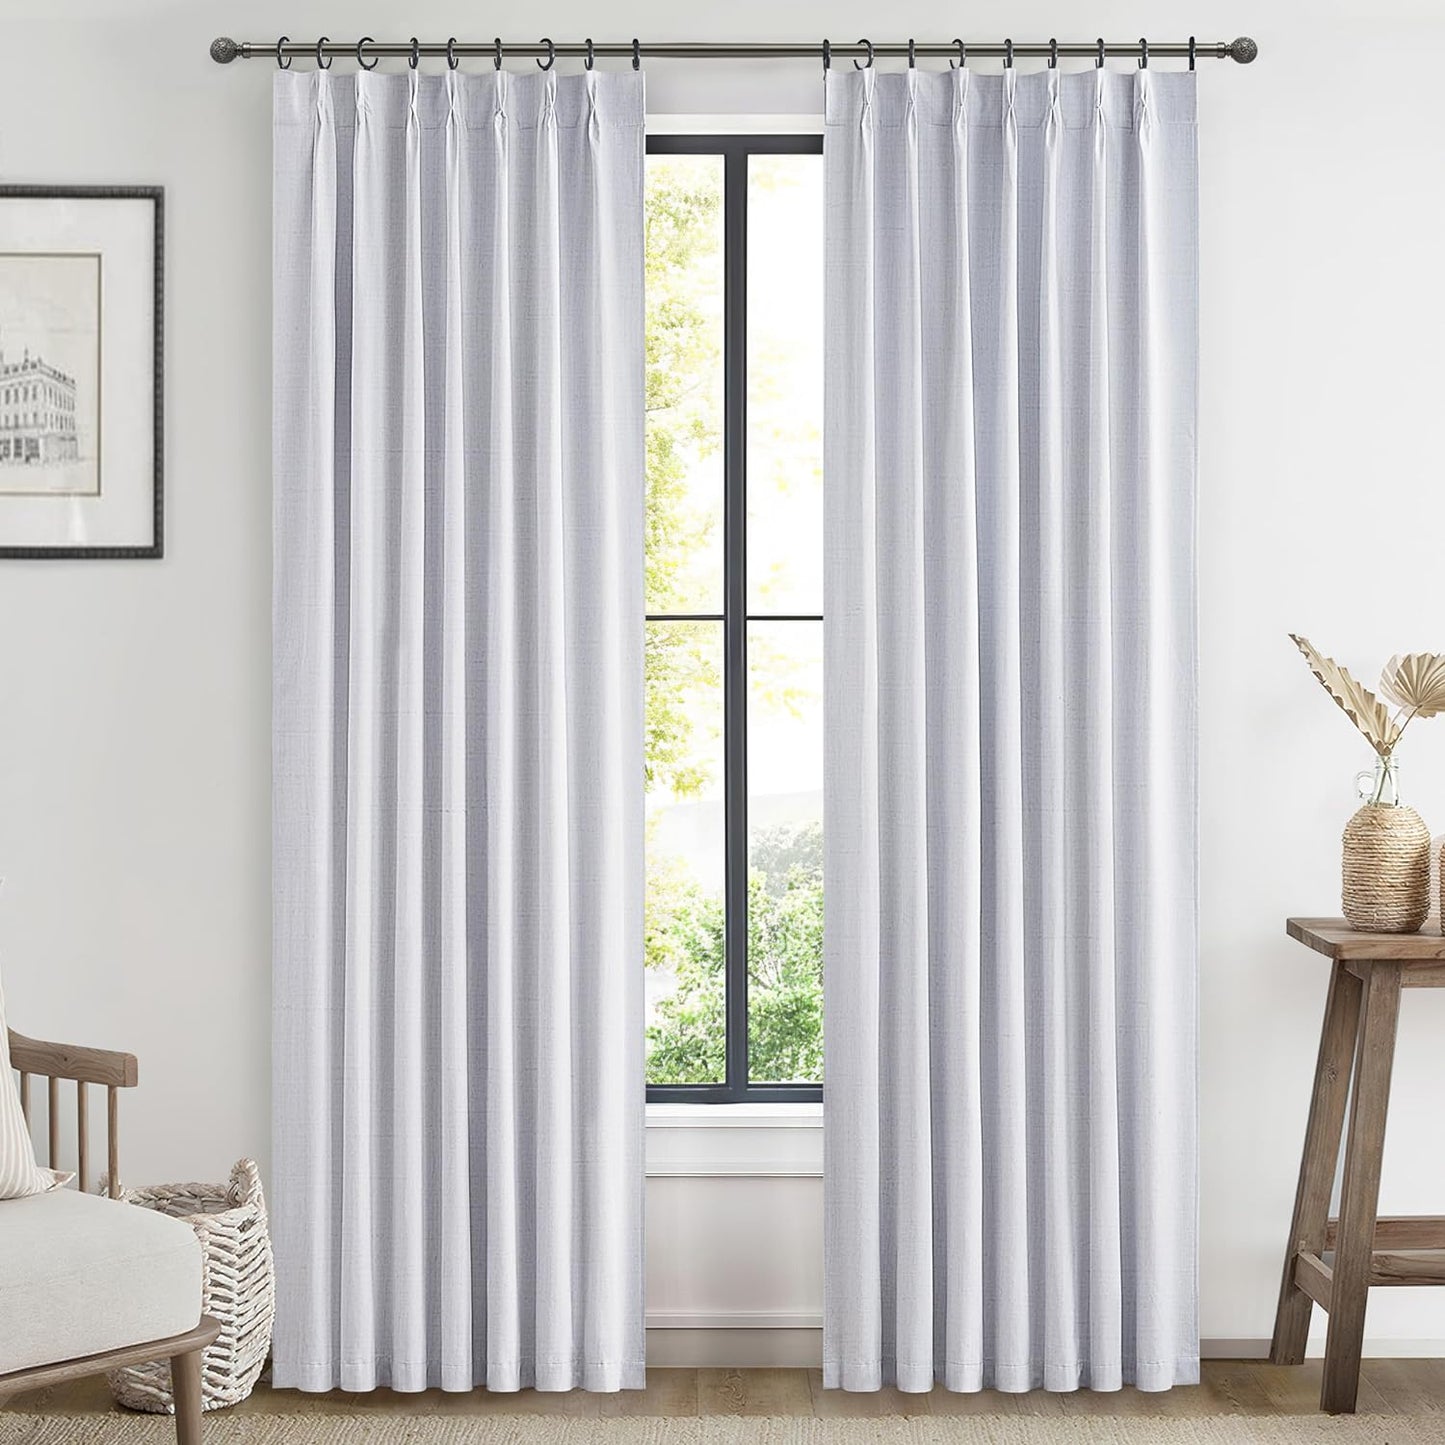 Natural Linen Pinch Pleated Blackout Curtains & Drapes 96 Inch Long Bedroom/Livingroom Farmhouse Curtains 2 Panel Sets, Neutral Track Room Darkening Thermal Insulated 8Ft Back Tab Window Curtain  QJmydeco Greyish White 40"W X 90"L X 2 Panels 